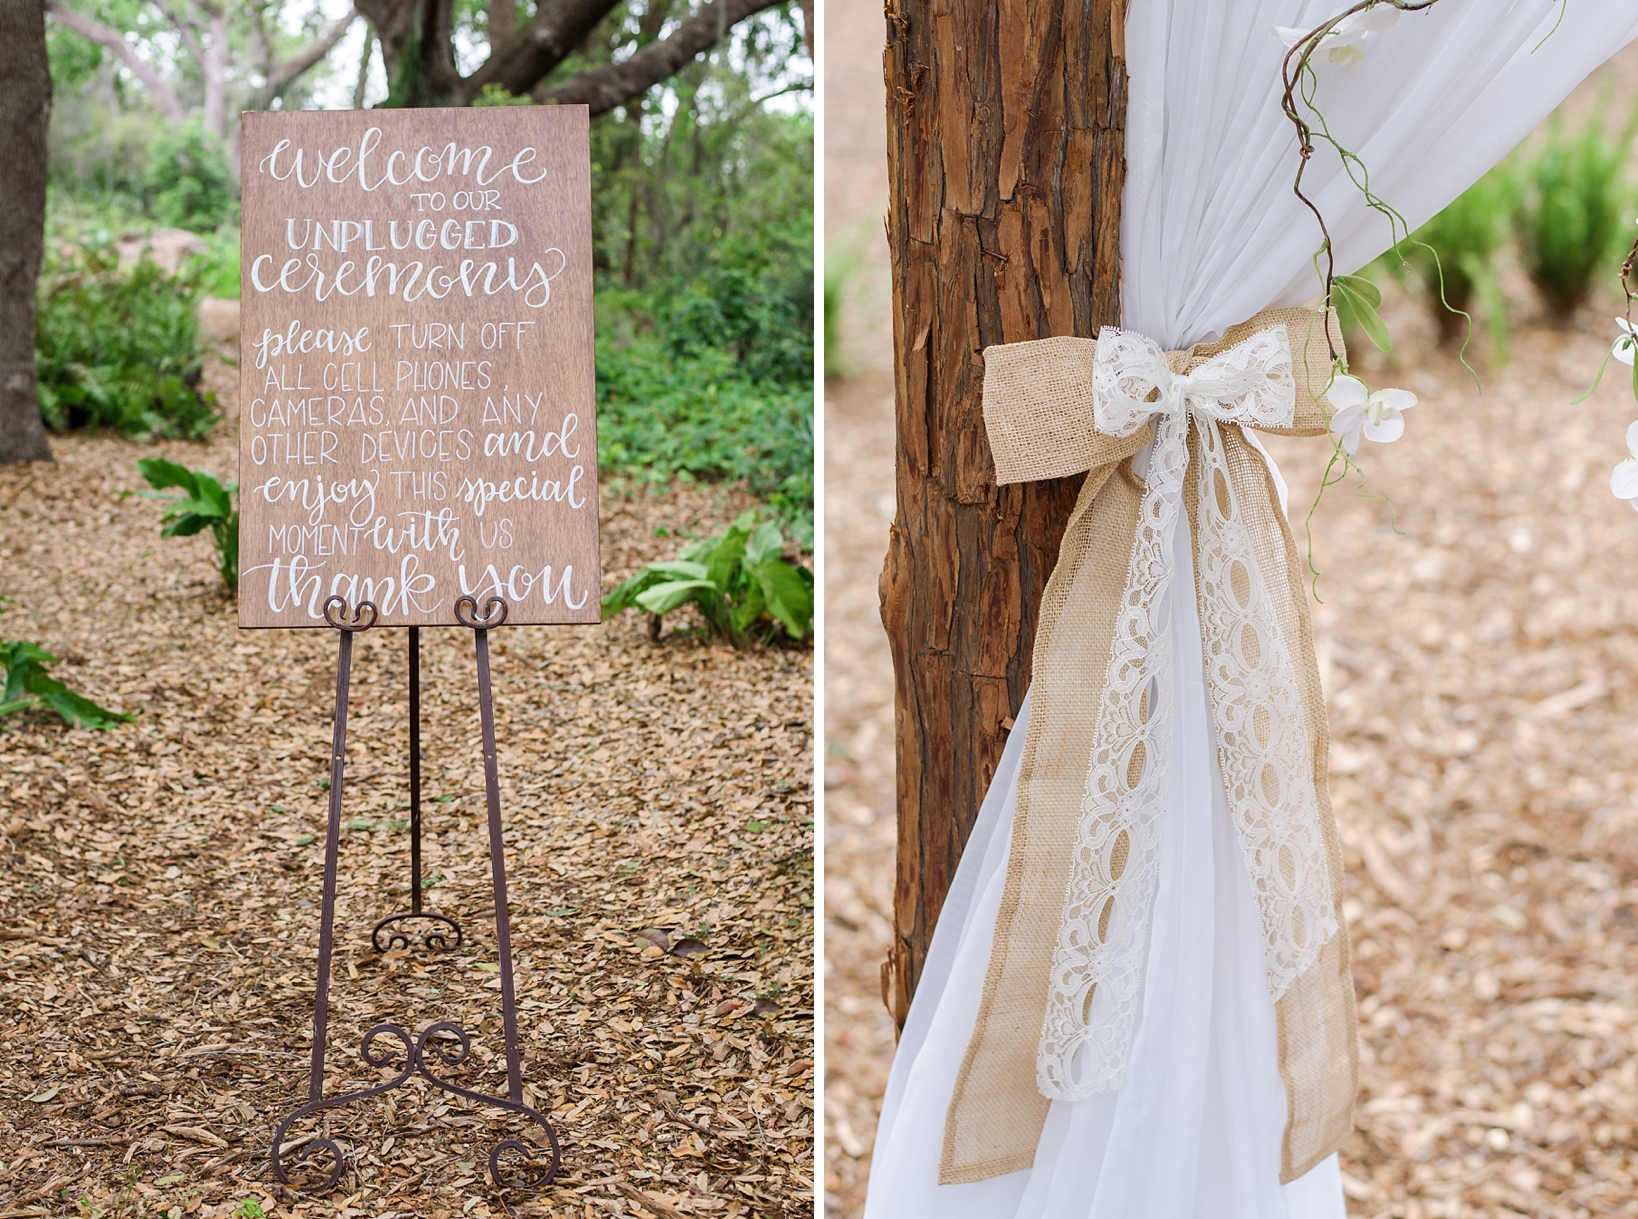 Rustic lace bows tied around the wedding arch and forest covered wedding signs